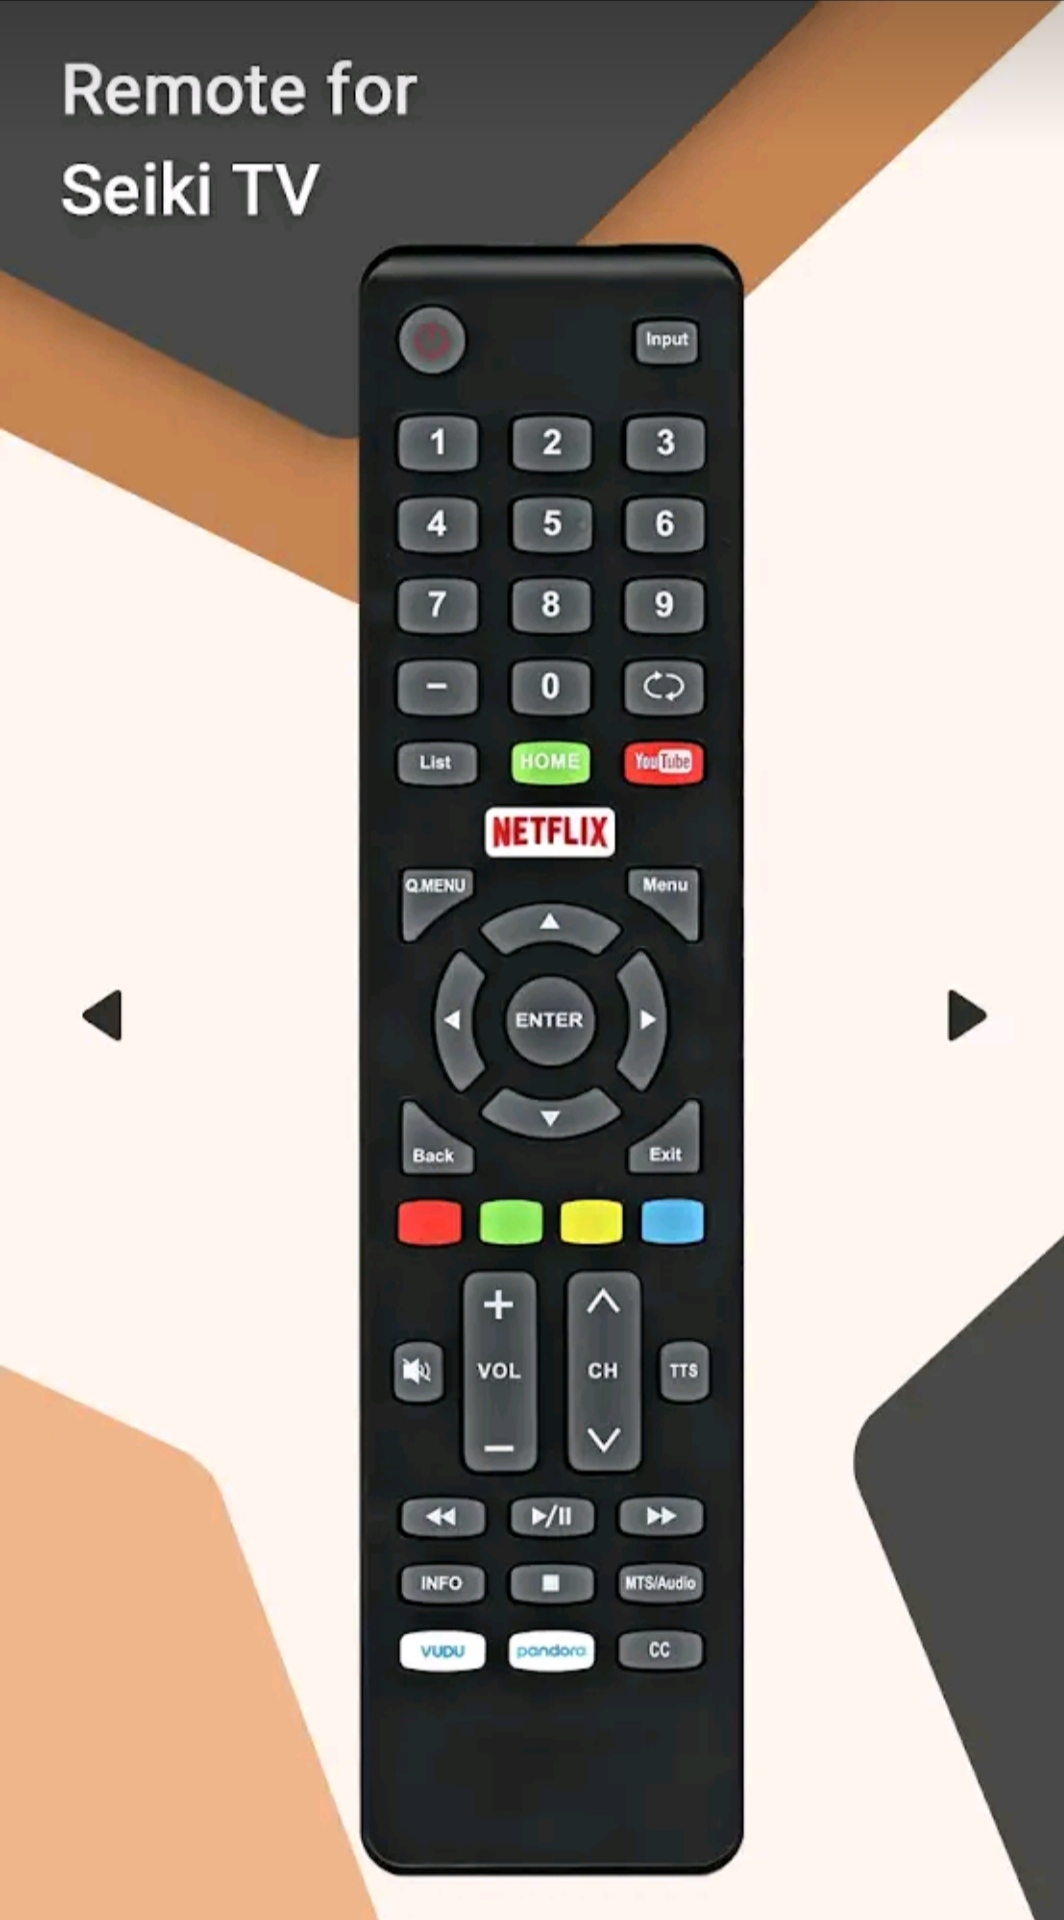 Use remote for Seiki TV  to Connect Seiki TV to WiFi Without Remote